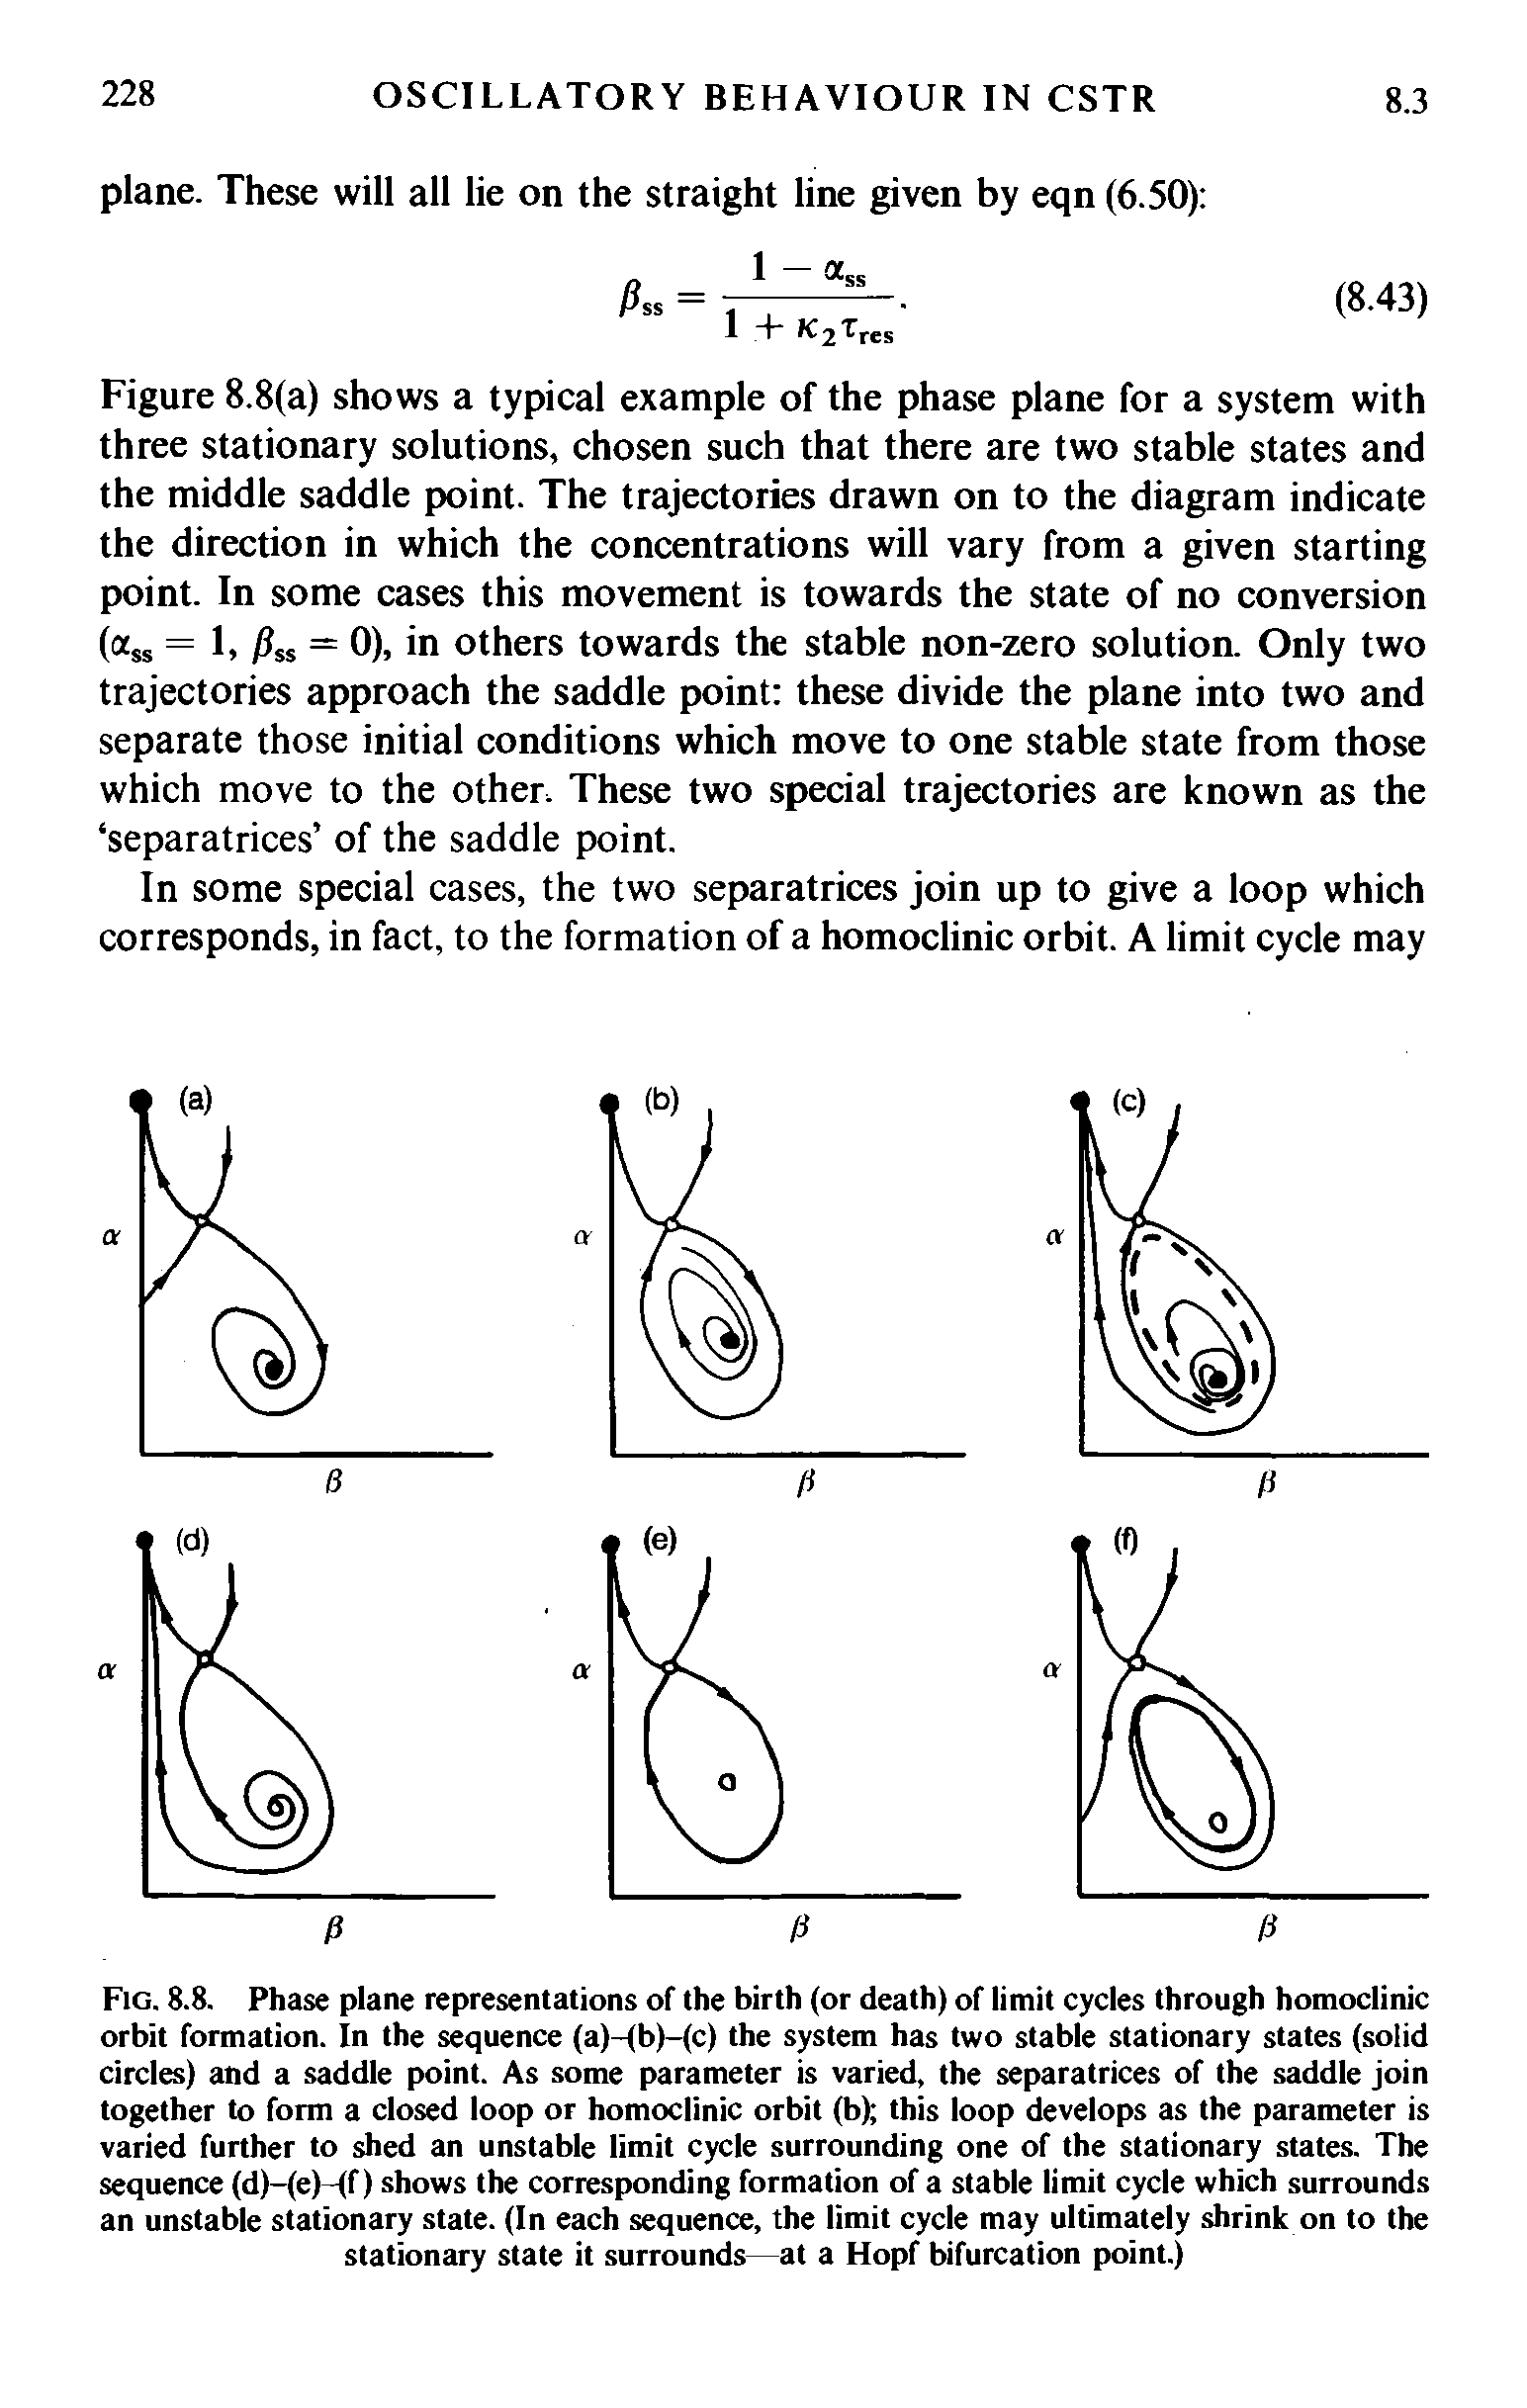 Fig. 8.8. Phase plane representations of the birth (or death) of limit cycles through homoclinic orbit formation. In the sequence (a)-fb)-(c) the system has two stable stationary states (solid circles) and a saddle point. As some parameter is varied, the separatrices of the saddle join together to form a closed loop or homoclinic orbit (b) this loop develops as the parameter is varied further to shed an unstable limit cycle surrounding one of the stationary states. The sequence (d)-(e)-(f) shows the corresponding formation of a stable limit cycle which surrounds an unstable stationary state. (In each sequence, the limit cycle may ultimately shrink on to the stationary state it surrounds—at a Hopf bifurcation point.)...